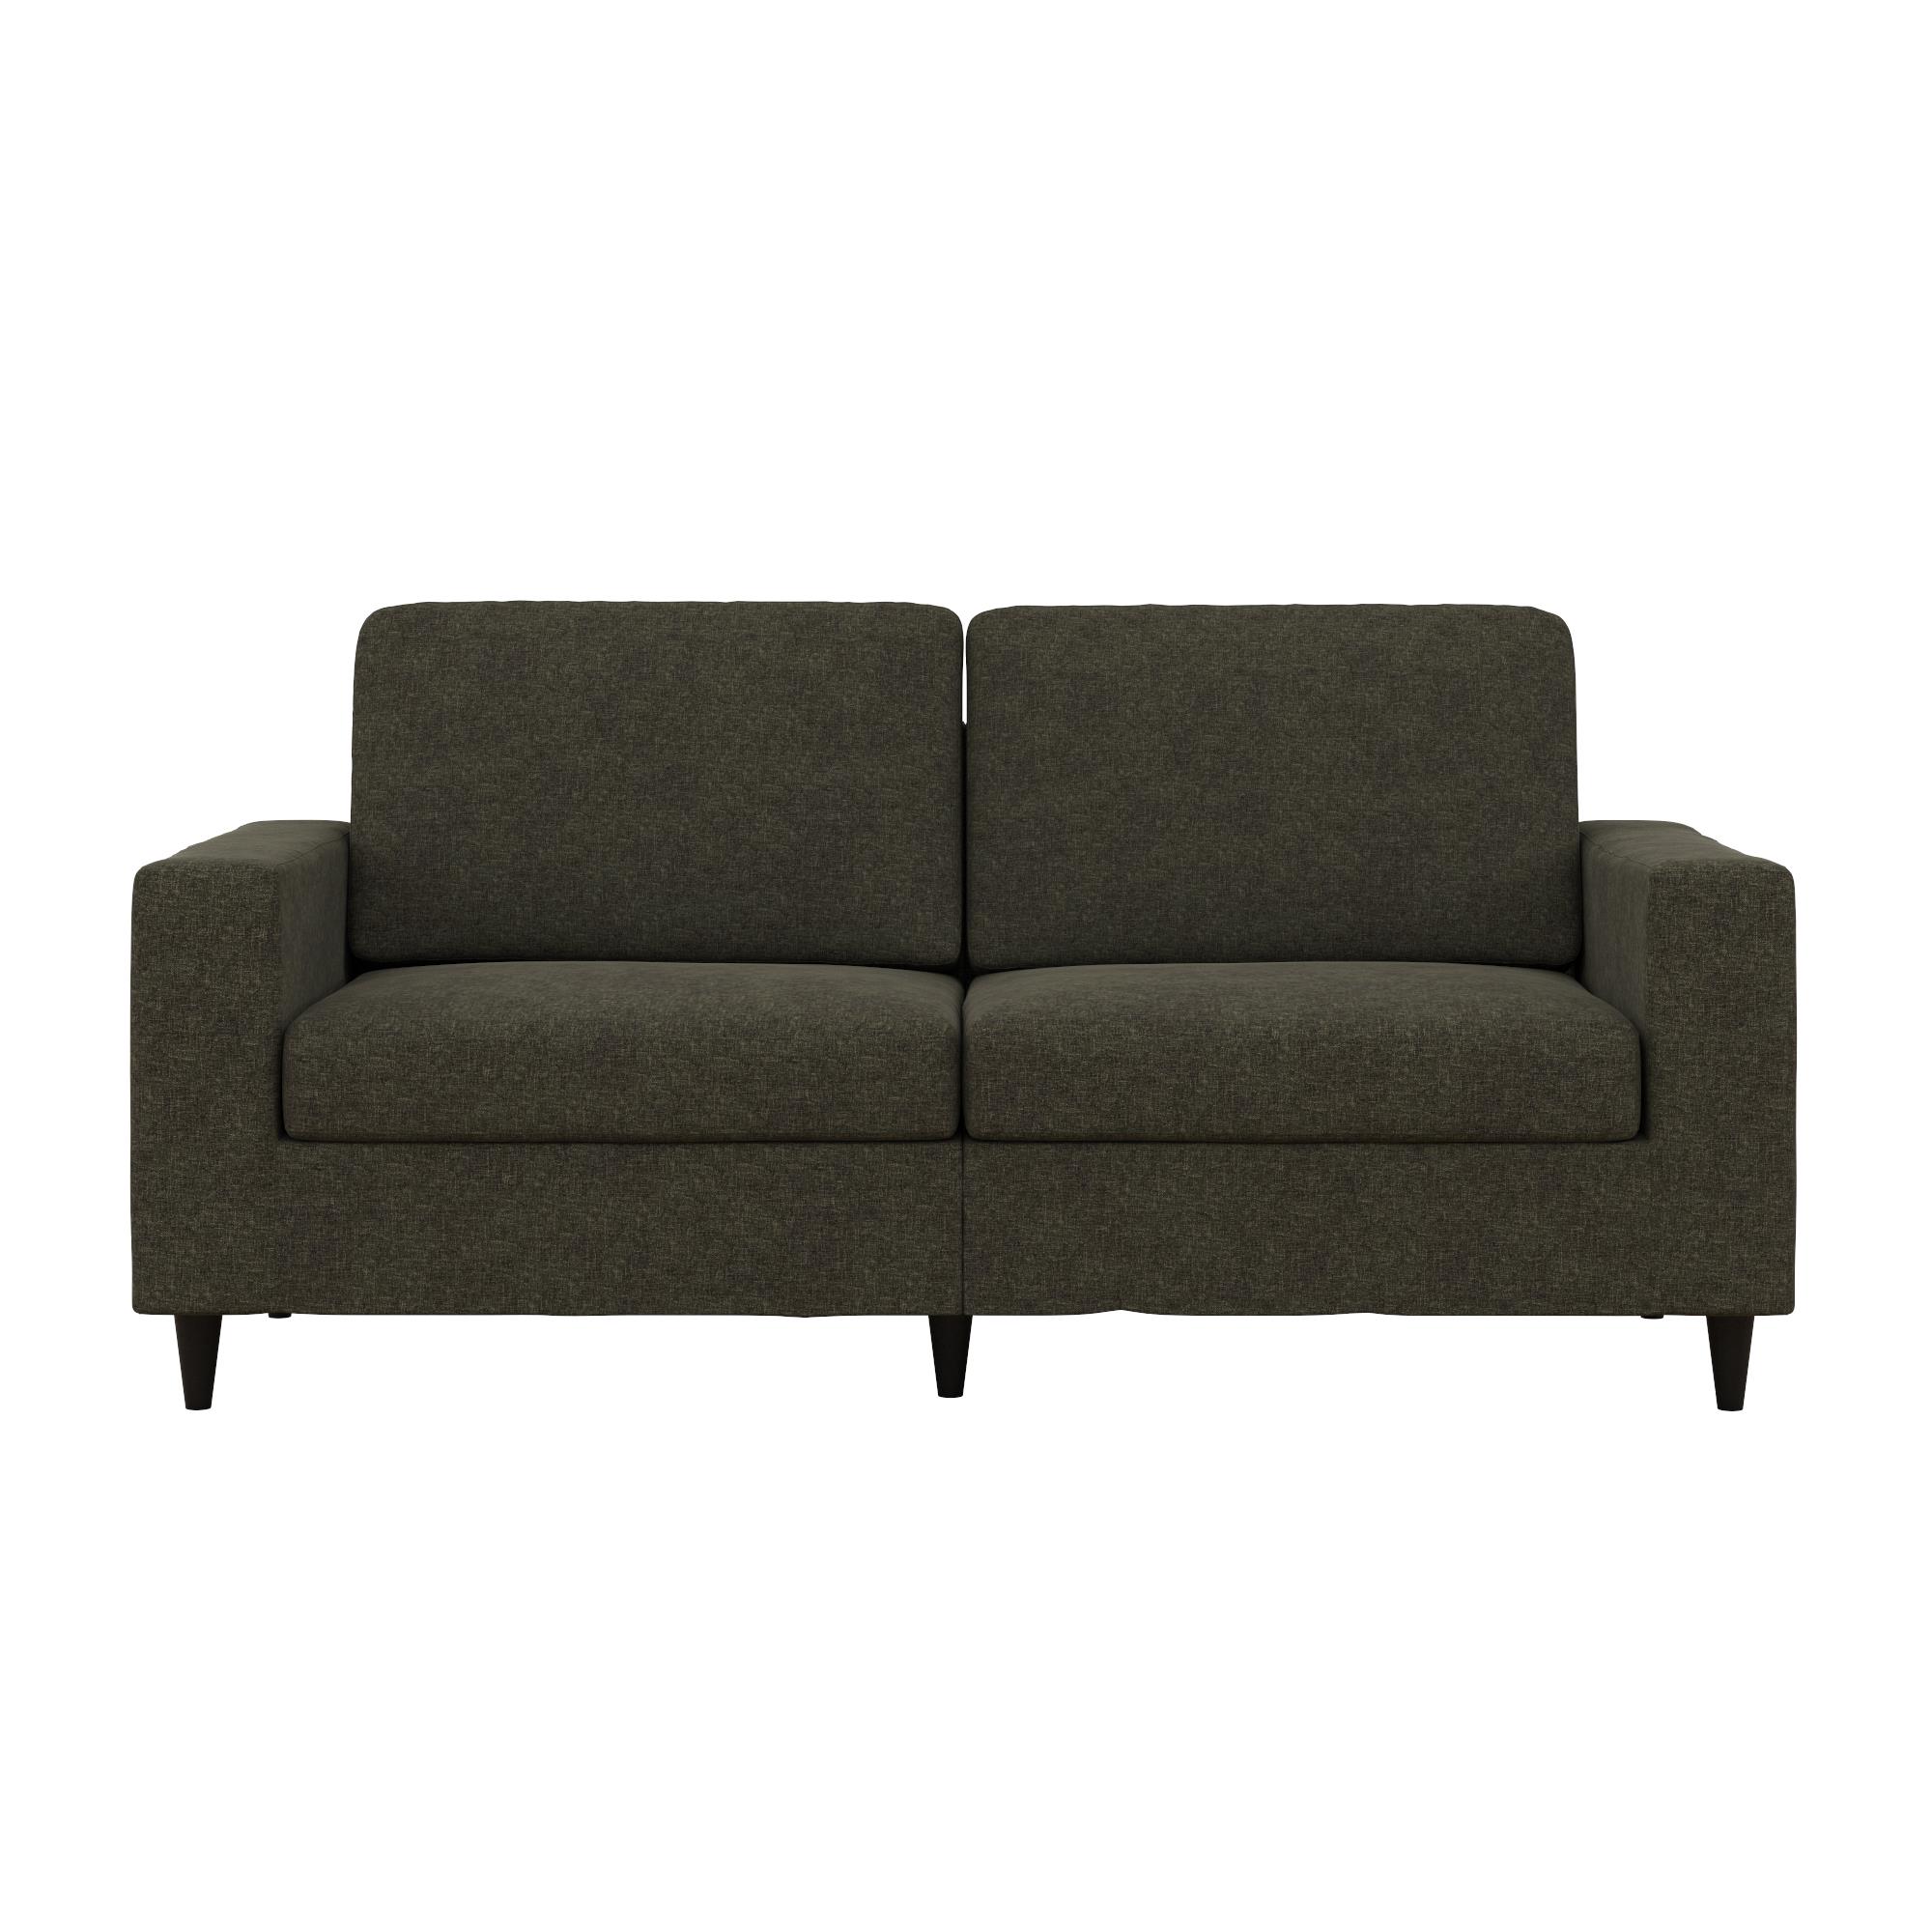 DHP Cooper 3 Seater Sofa, Gray Linen - image 4 of 18